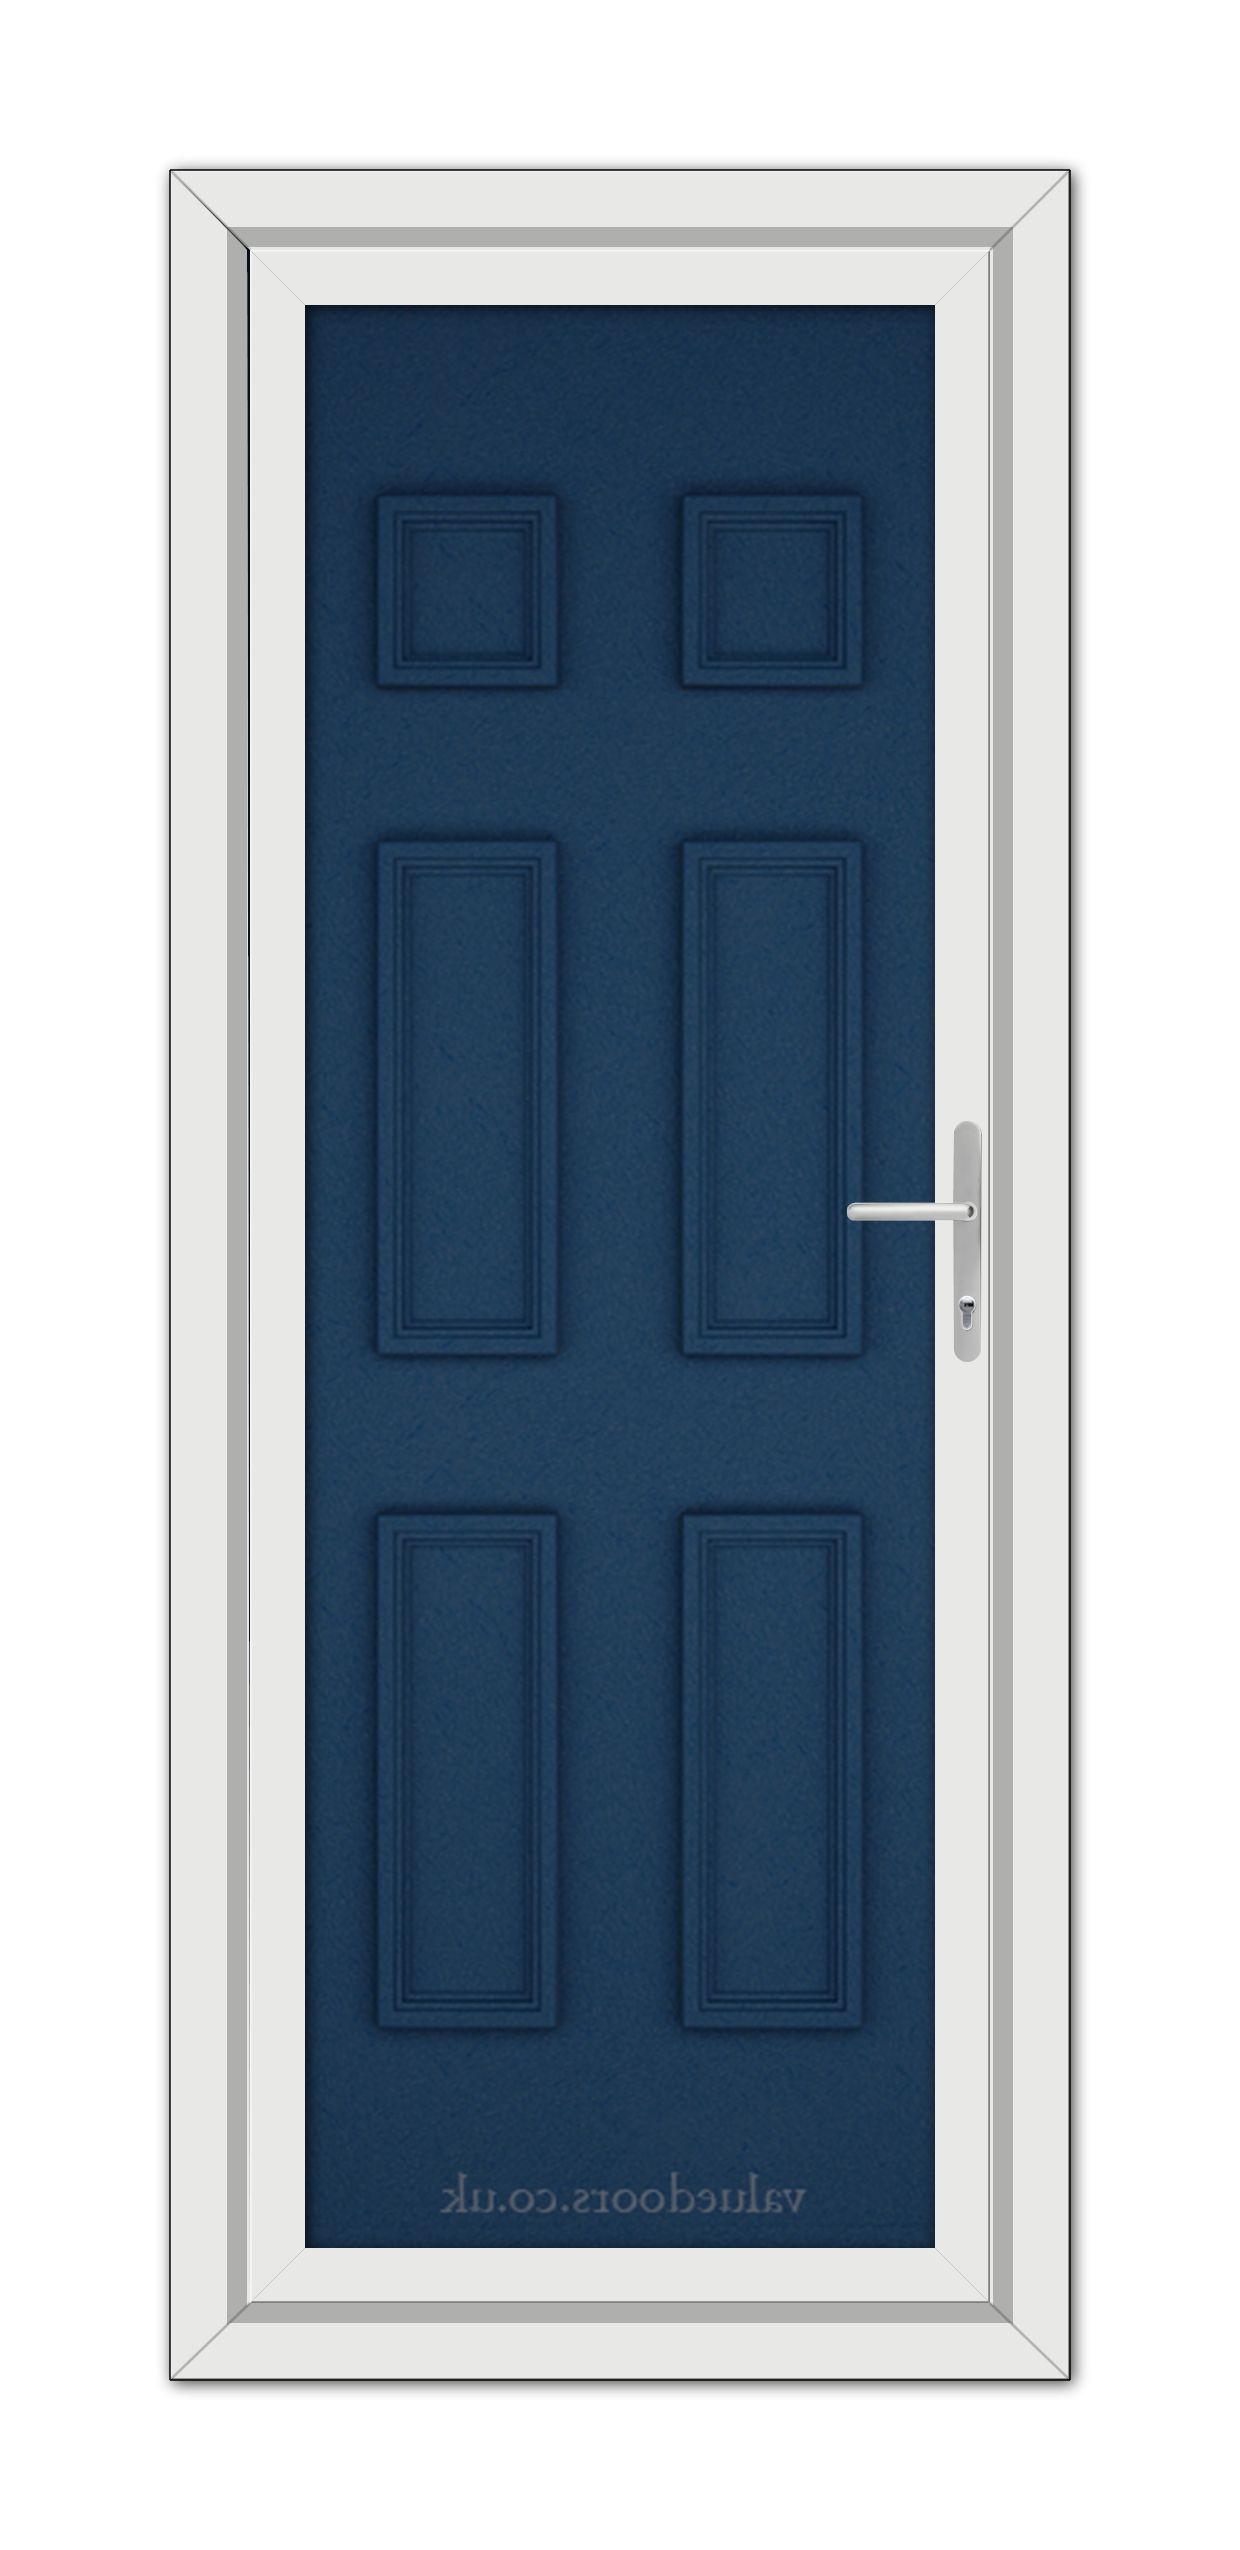 A Blue Windsor Solid uPVC Door with six panels and a silver handle, framed by a white door frame.